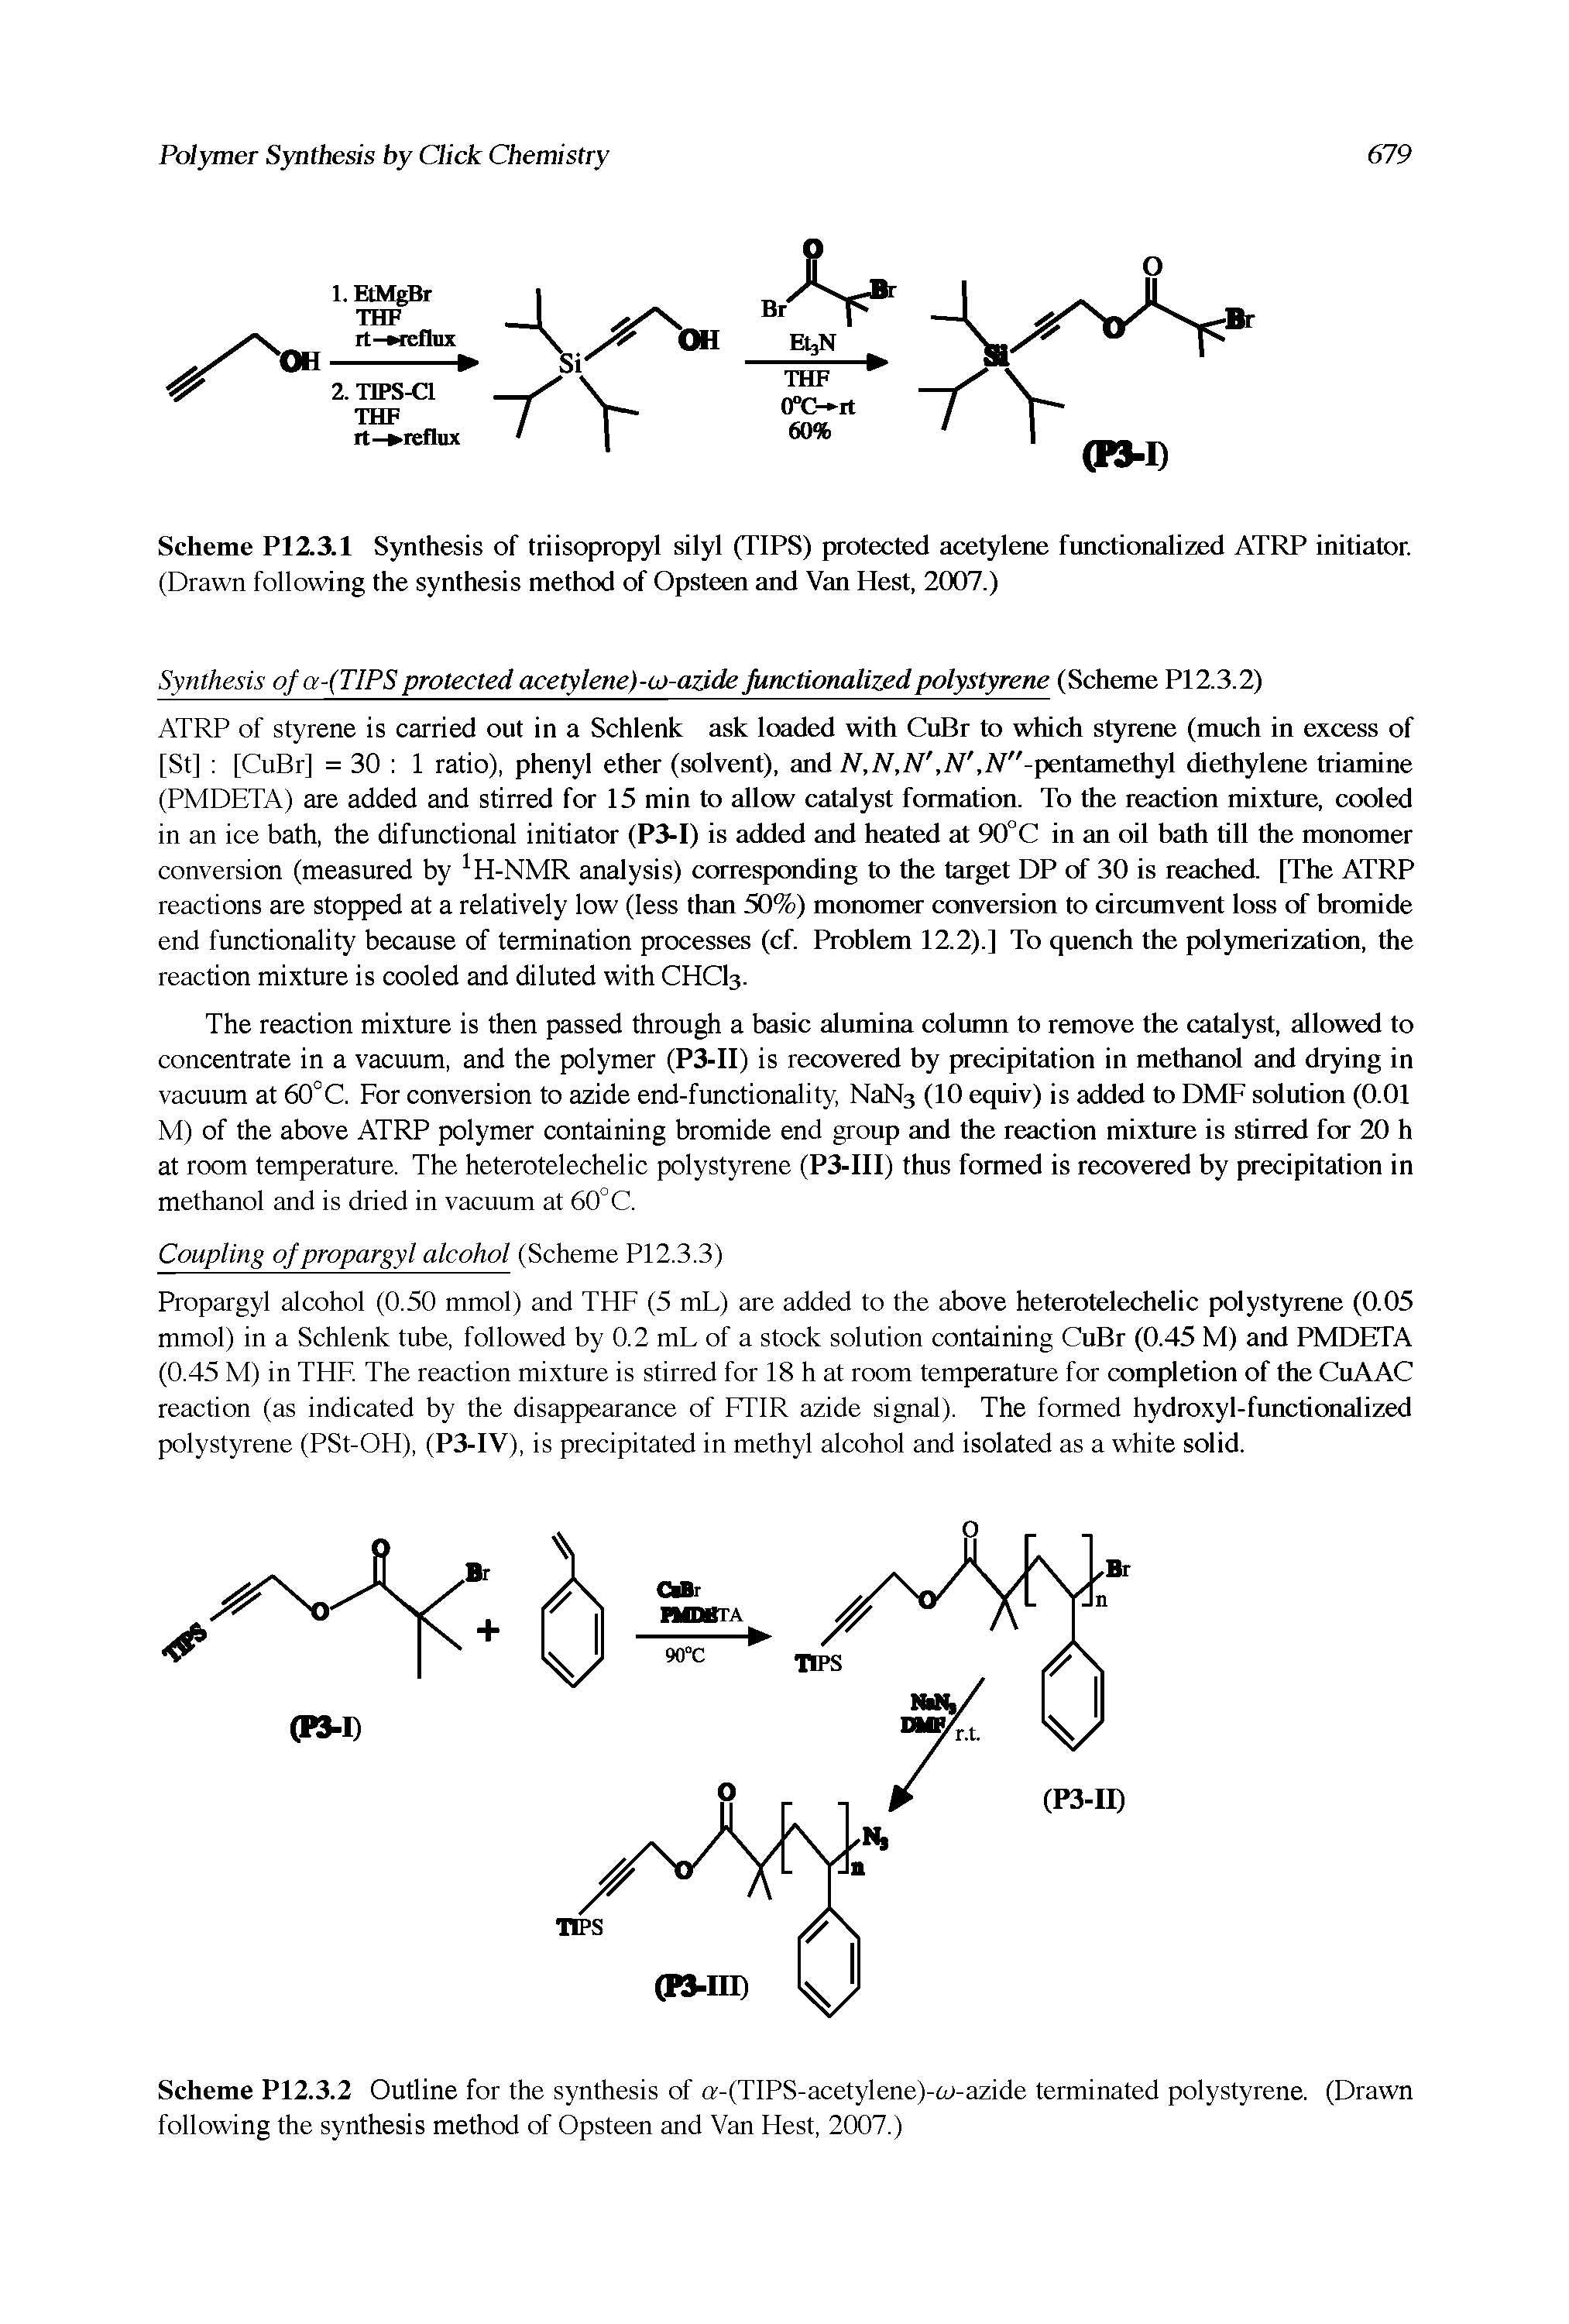 Scheme P12.3.2 Outline for the synthesis of o -(TIPS-acetylene)-a -azide terminated polystyrene. (Drawn following the synthesis method of Opsteen and Van Hest, 2007.)...